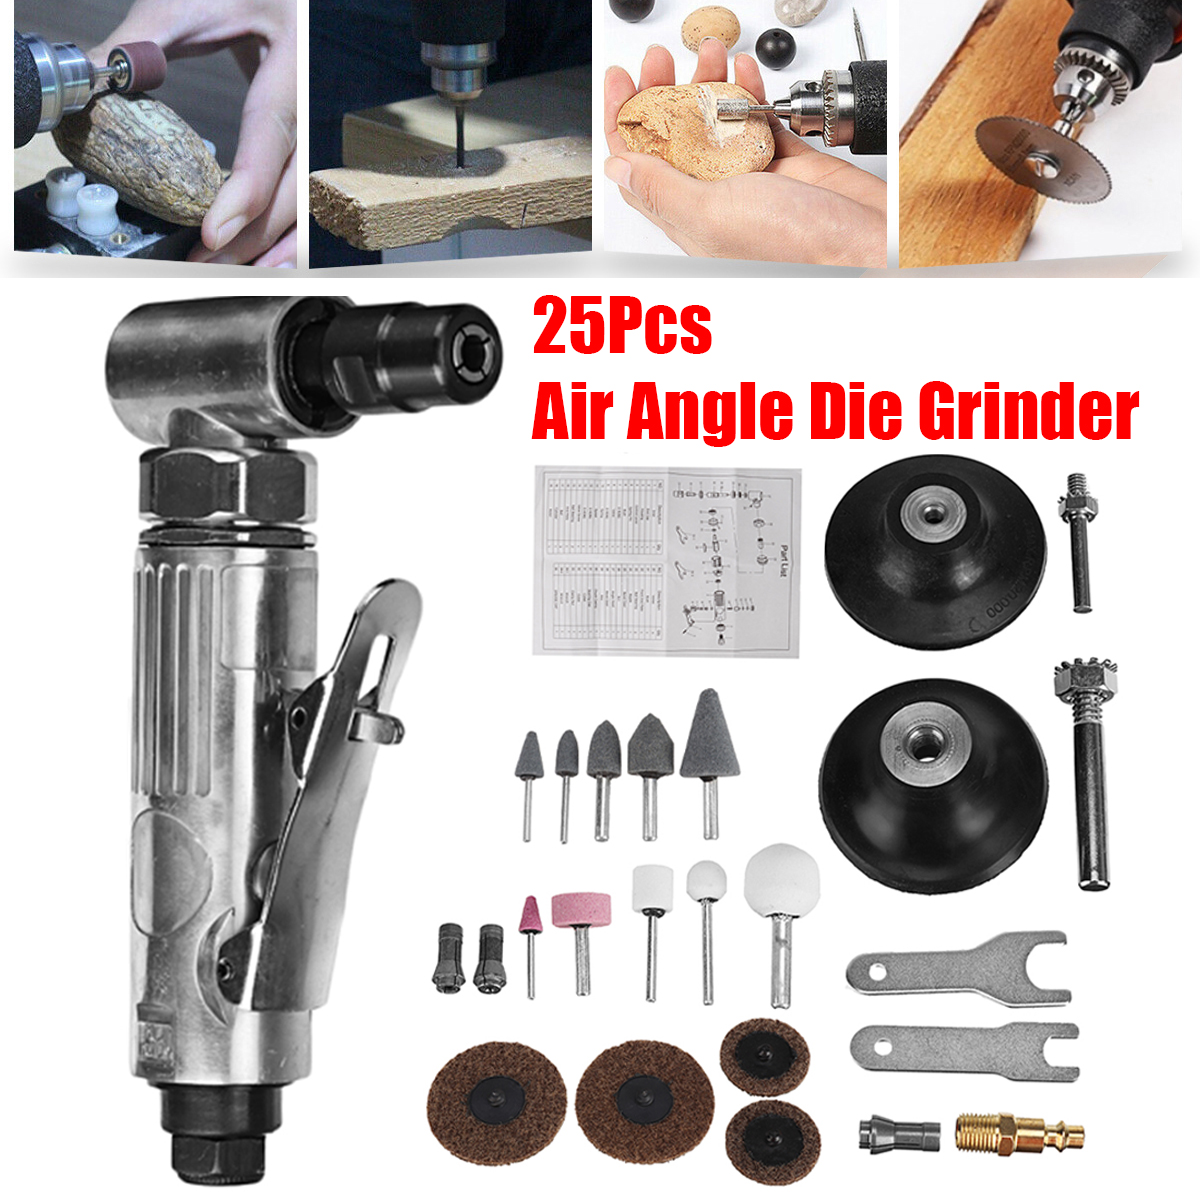 25Pcs-14quot-Electric-Polisher-Angle-Die-Grinder-Tools-Kit-20000Rpm-Air-Angle-Cleaning-Cutting-Grind-1904971-2